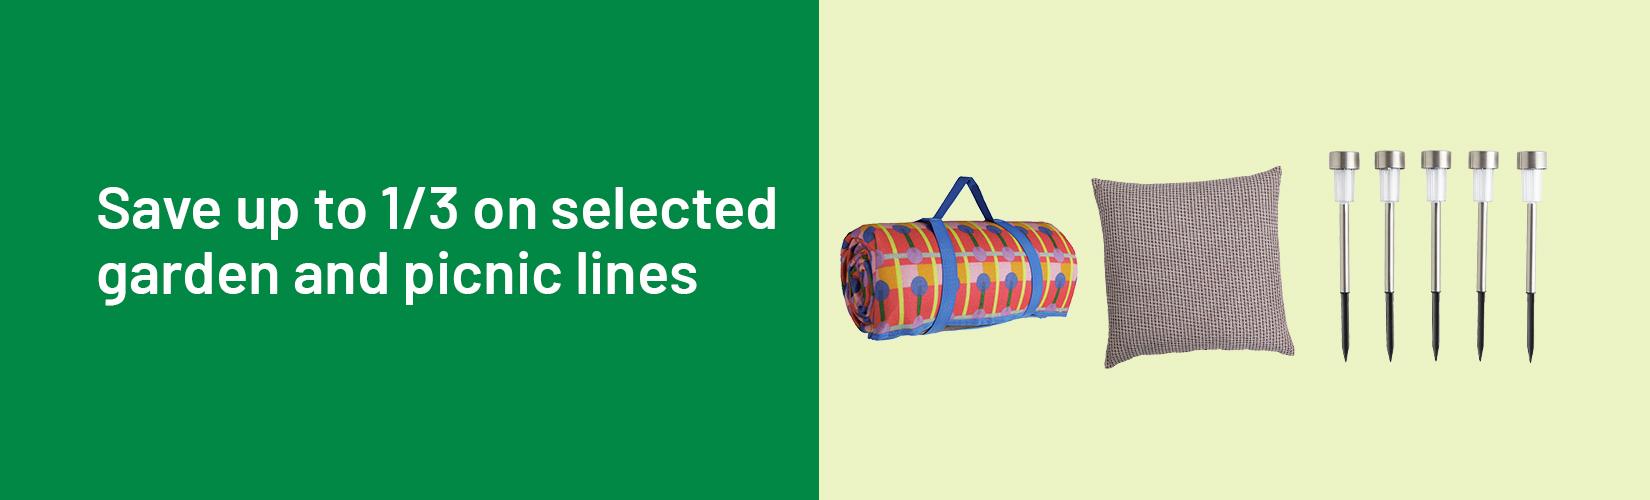 Save up to 1/3 on selected garden and picnic lines.